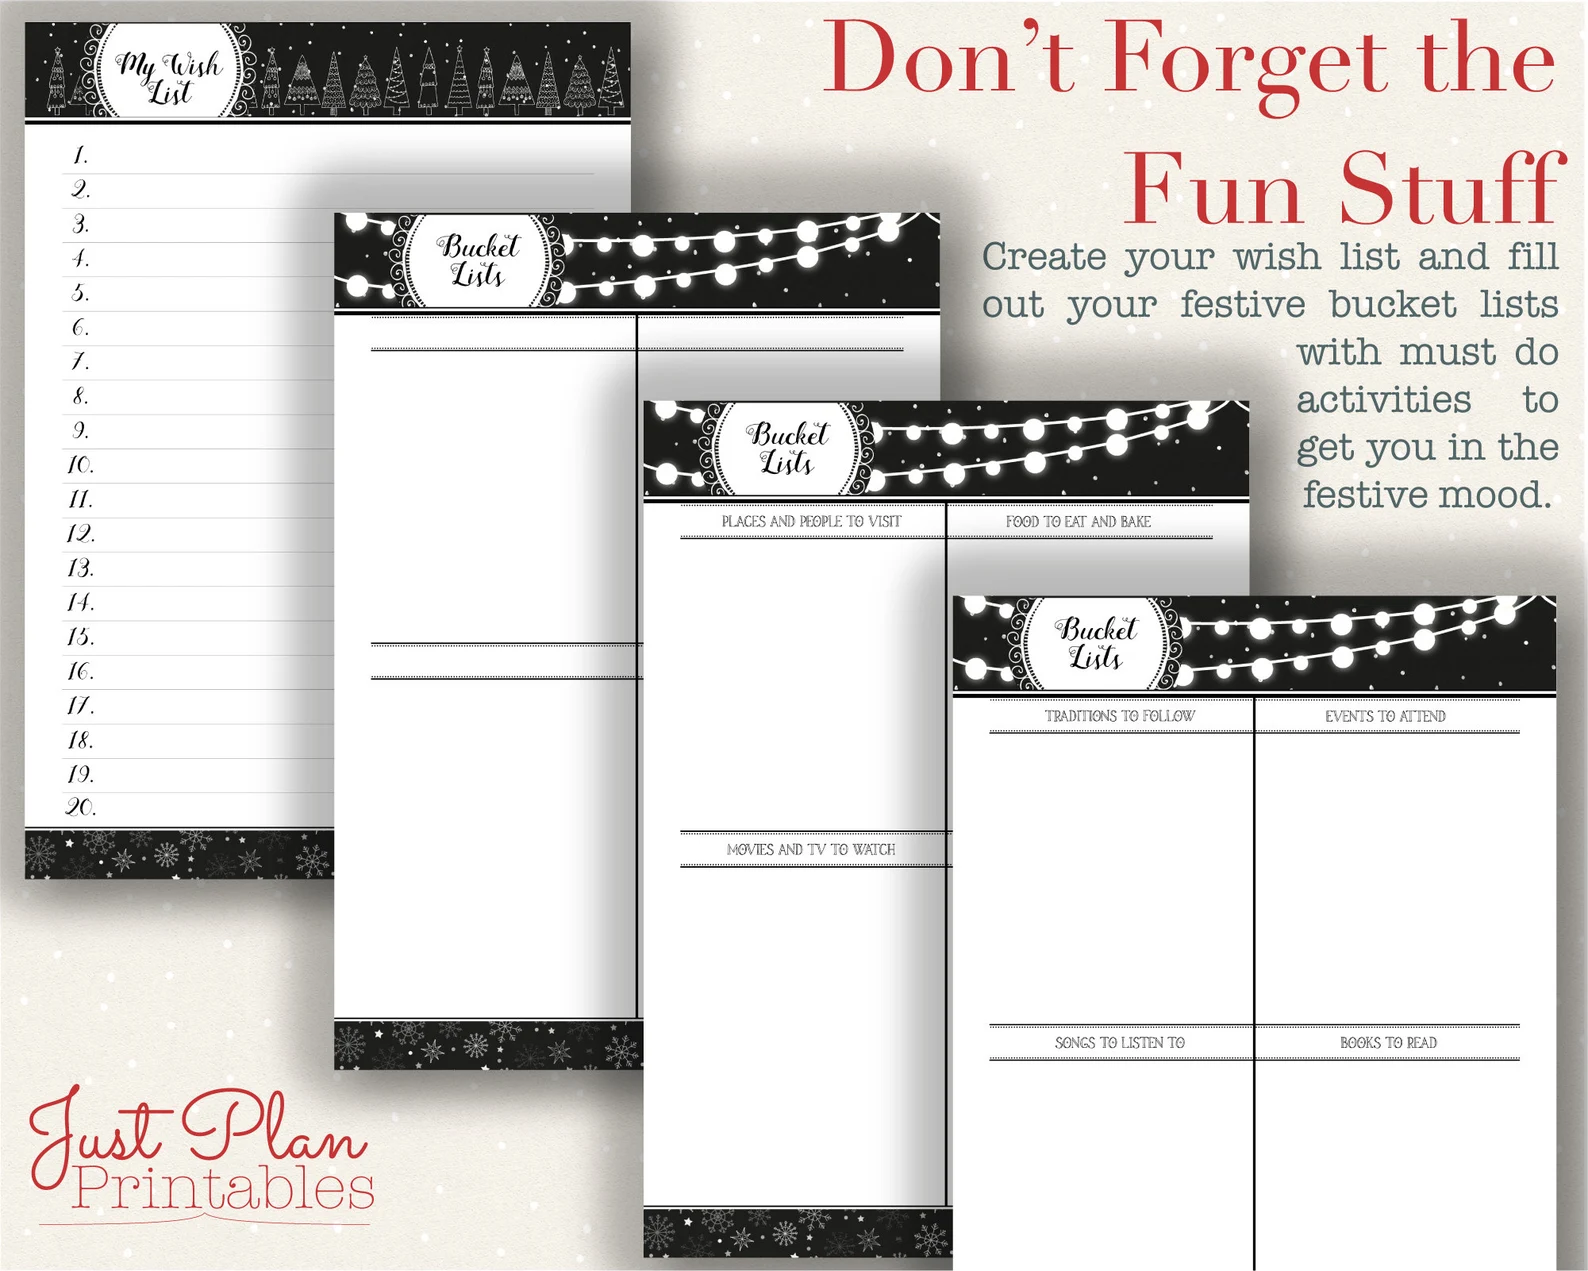 Christmas Planner Printables - Christmas bucket lists for movies and family traditions